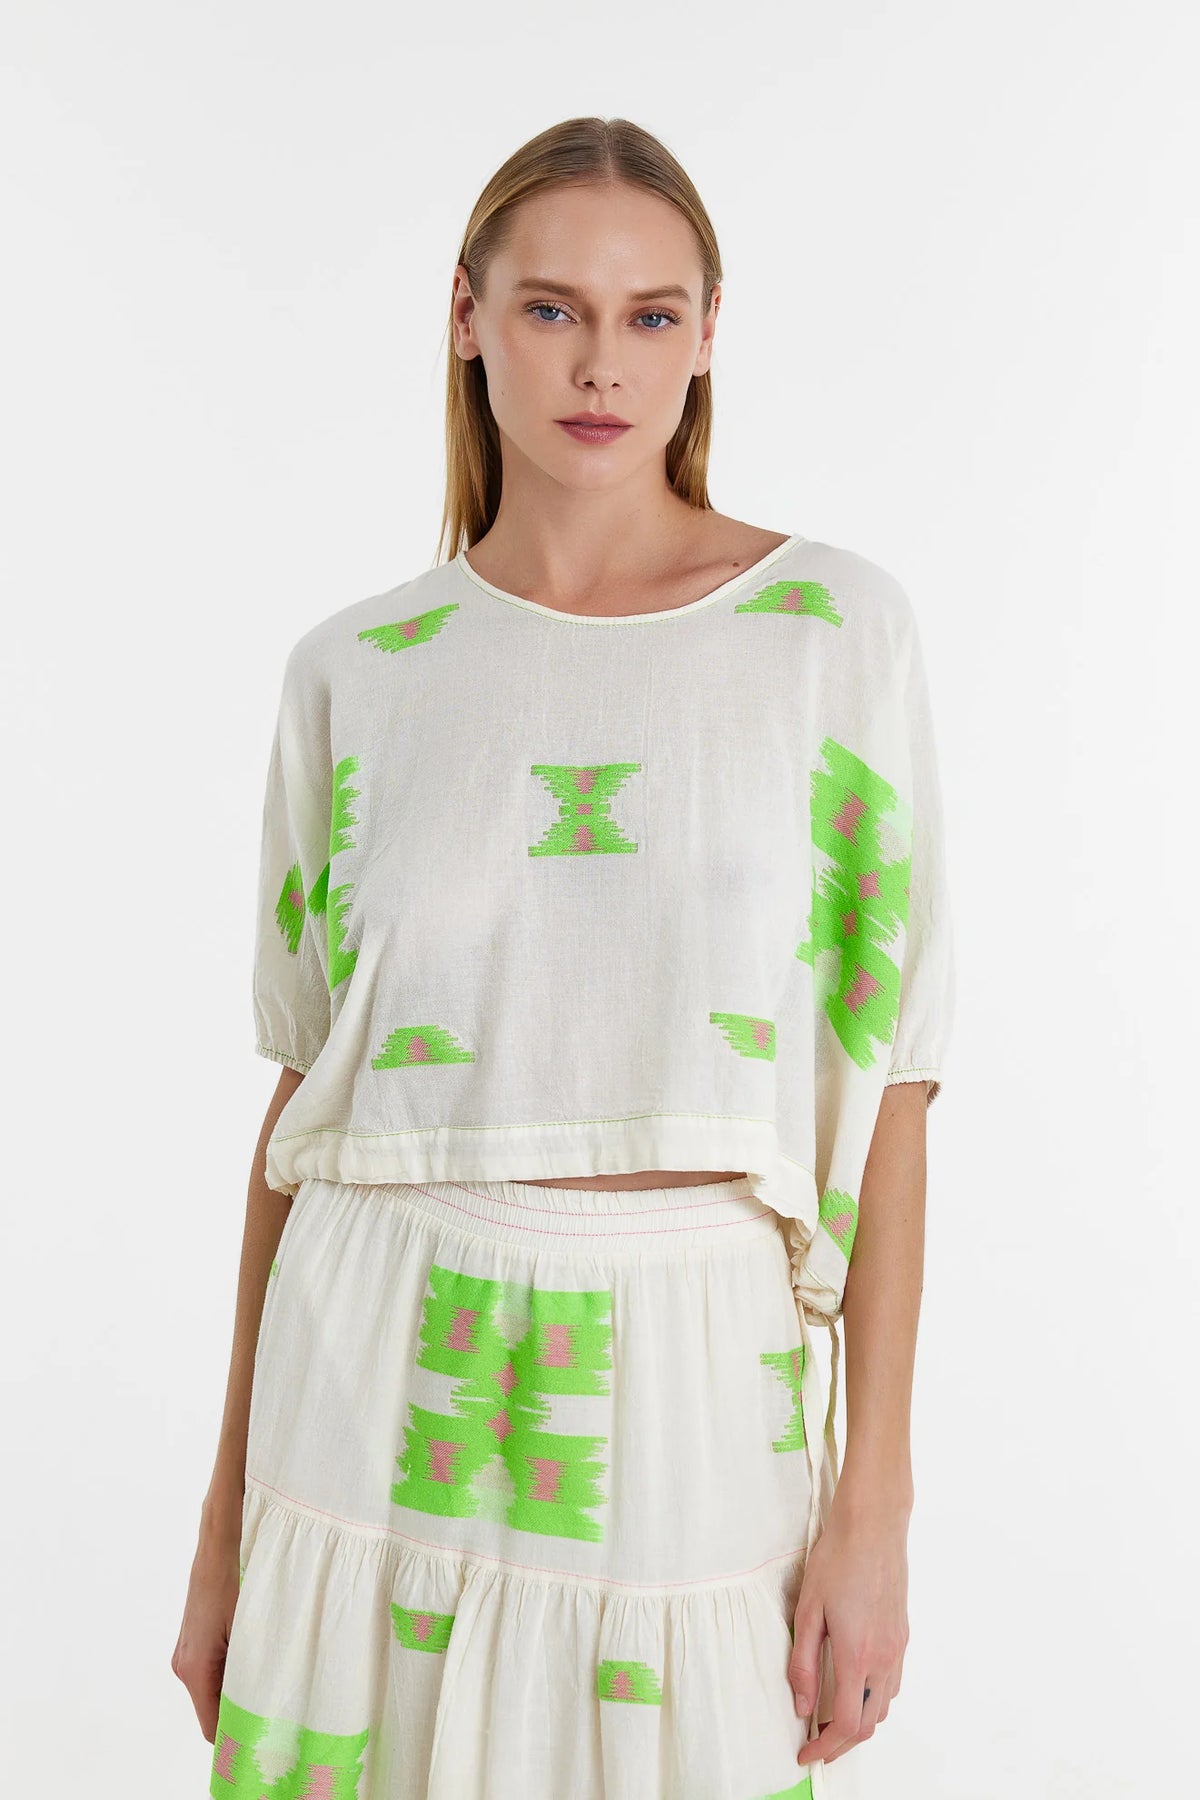 Short top with grown on short sleeves with elasticated cuffs and drawstring waist with cornflower pink and green woven abstract bold shapes throughout boxy fit